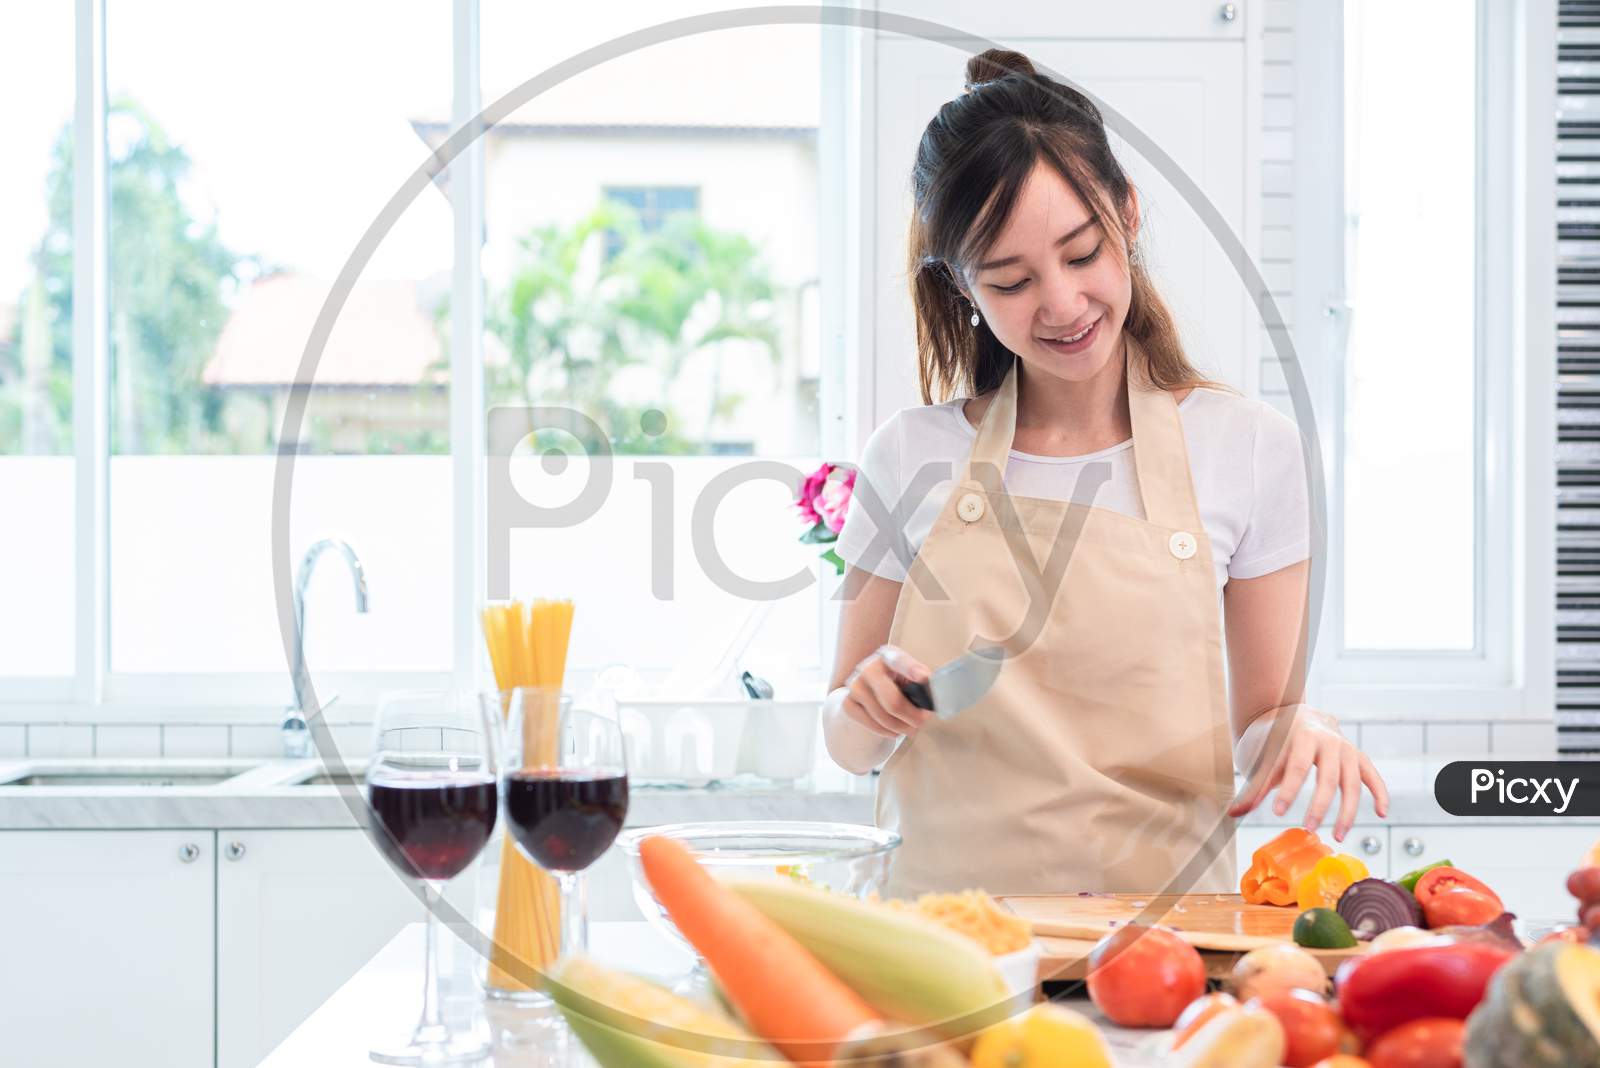 Asian Beauty Woman Cooking And Slicing Vegetable In Kitchen Room With Full Of Food And Fruit On Table. Holiday And Happiness Concept. People And Lifestyles Concept. Family And Dinner Party Theme.